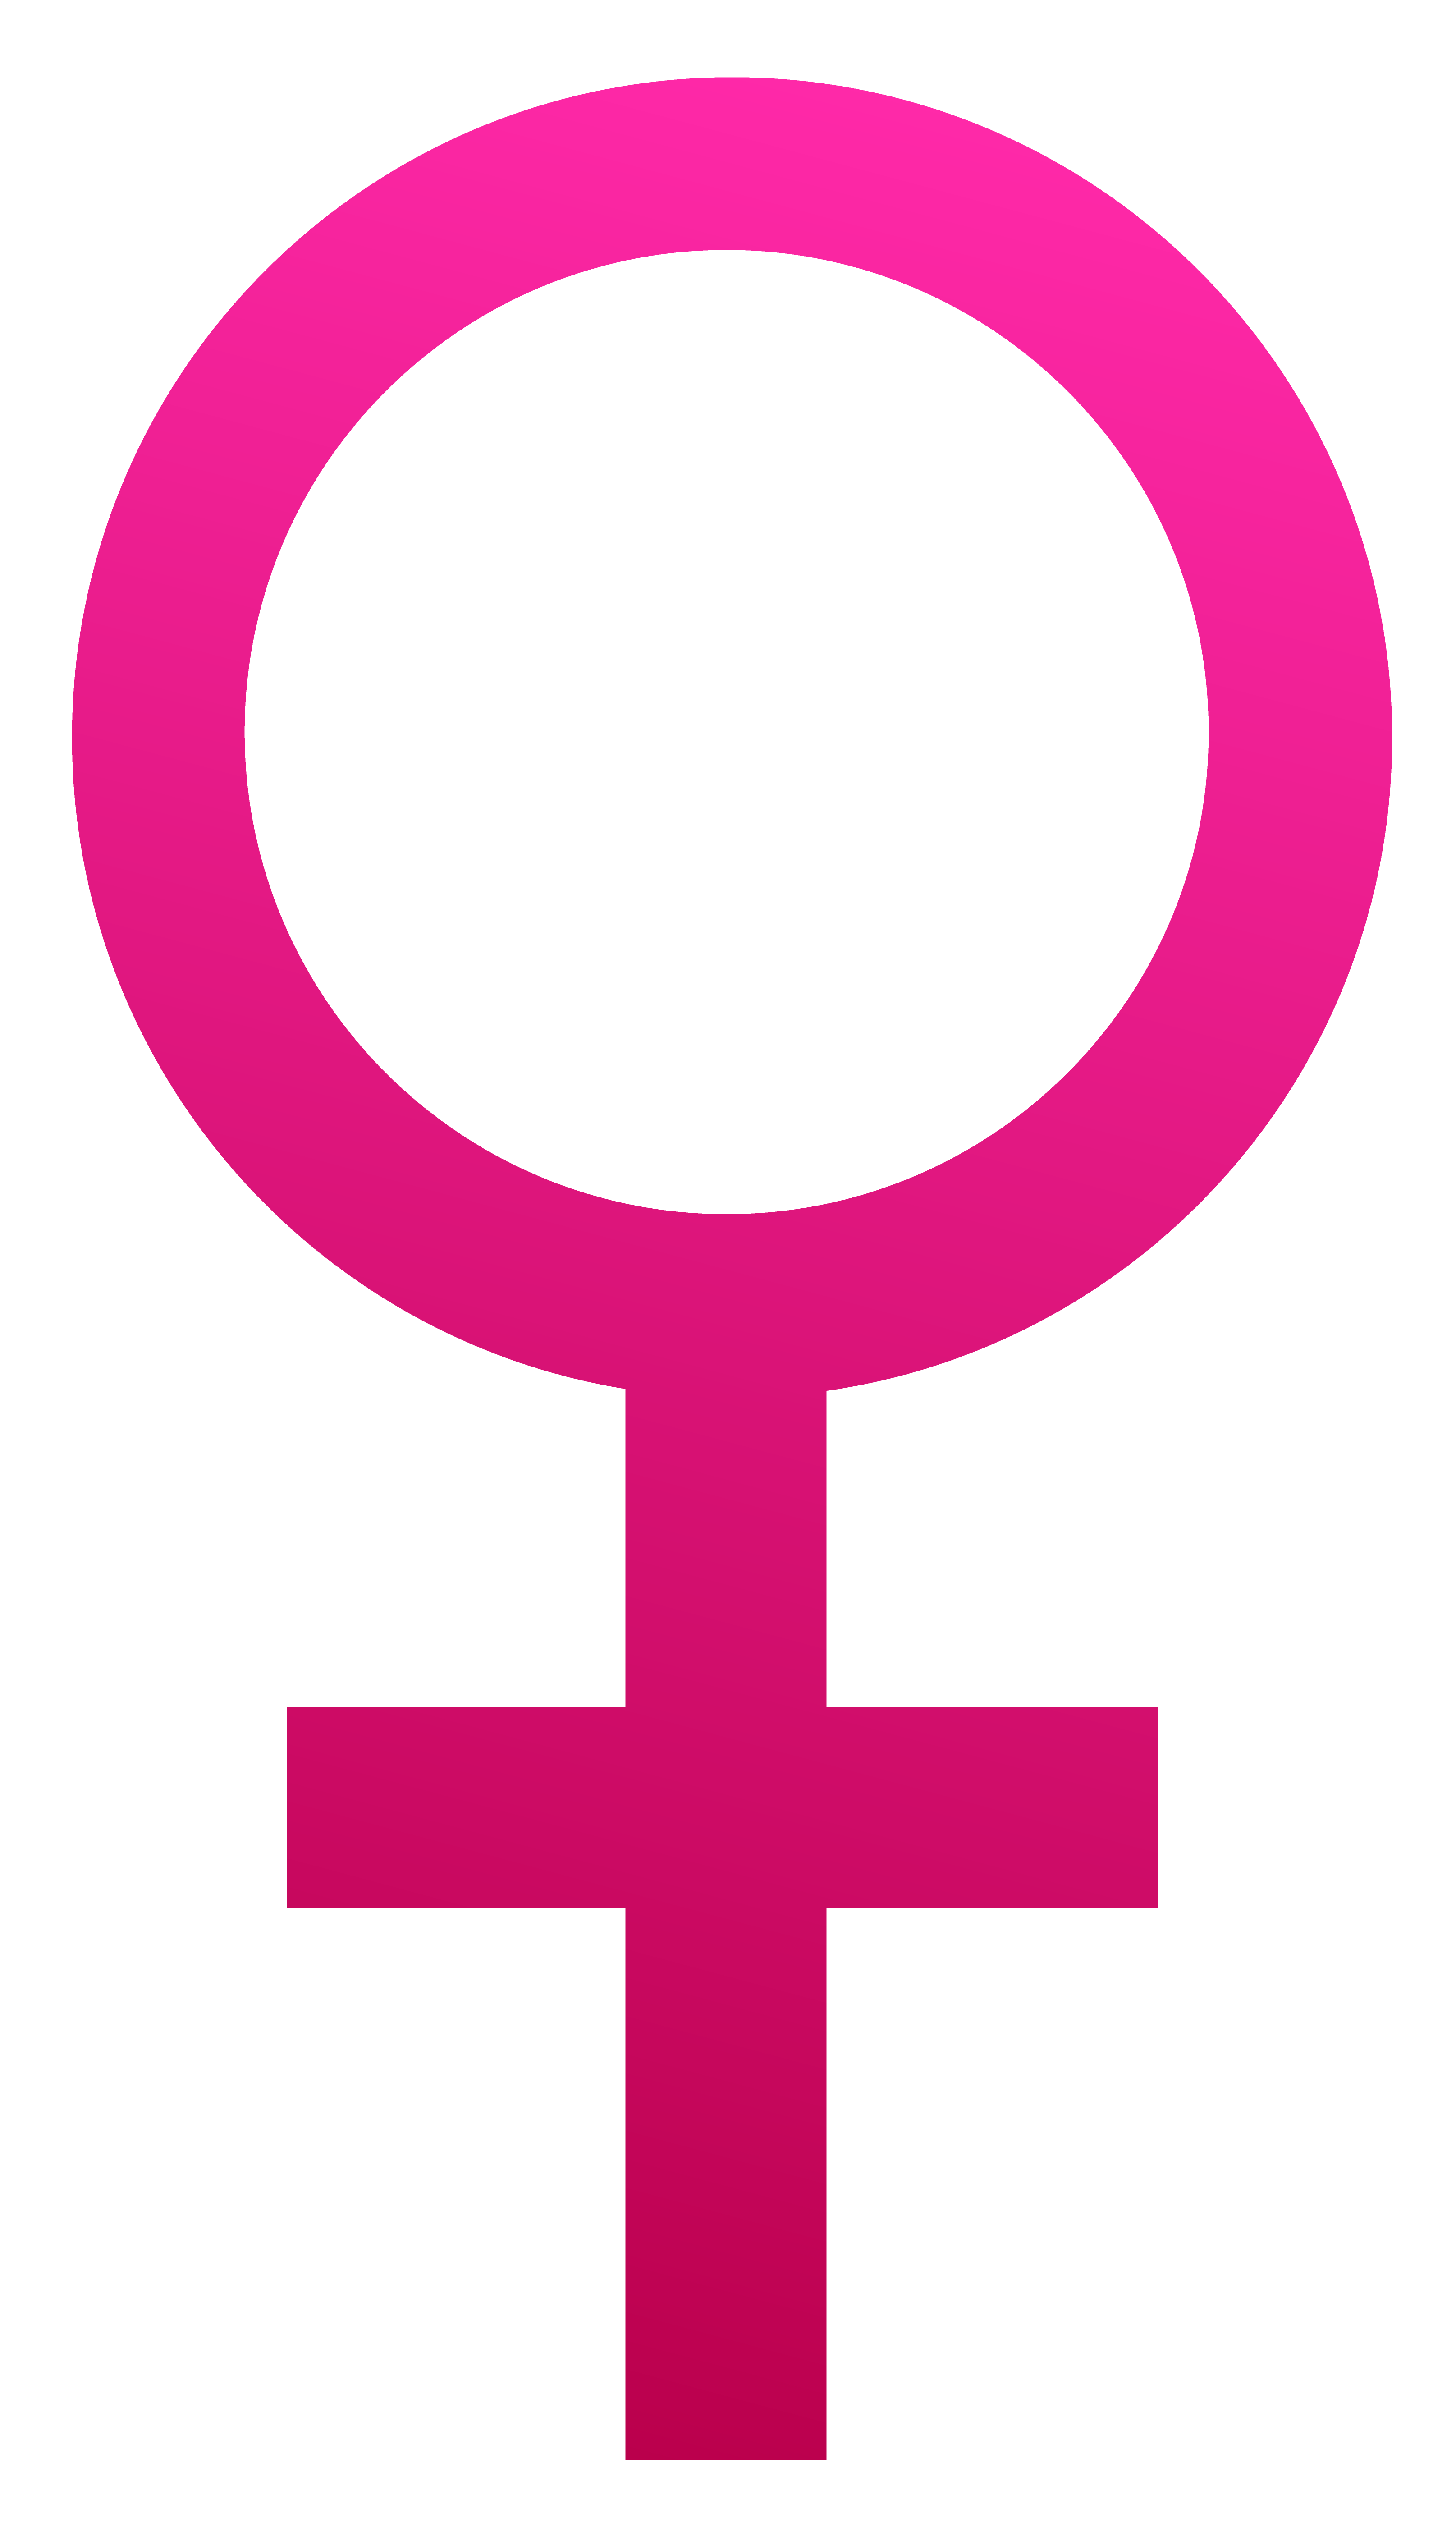 Symbol Of Woman Icon Transparent Symbol Of Womanpng Images And Vector